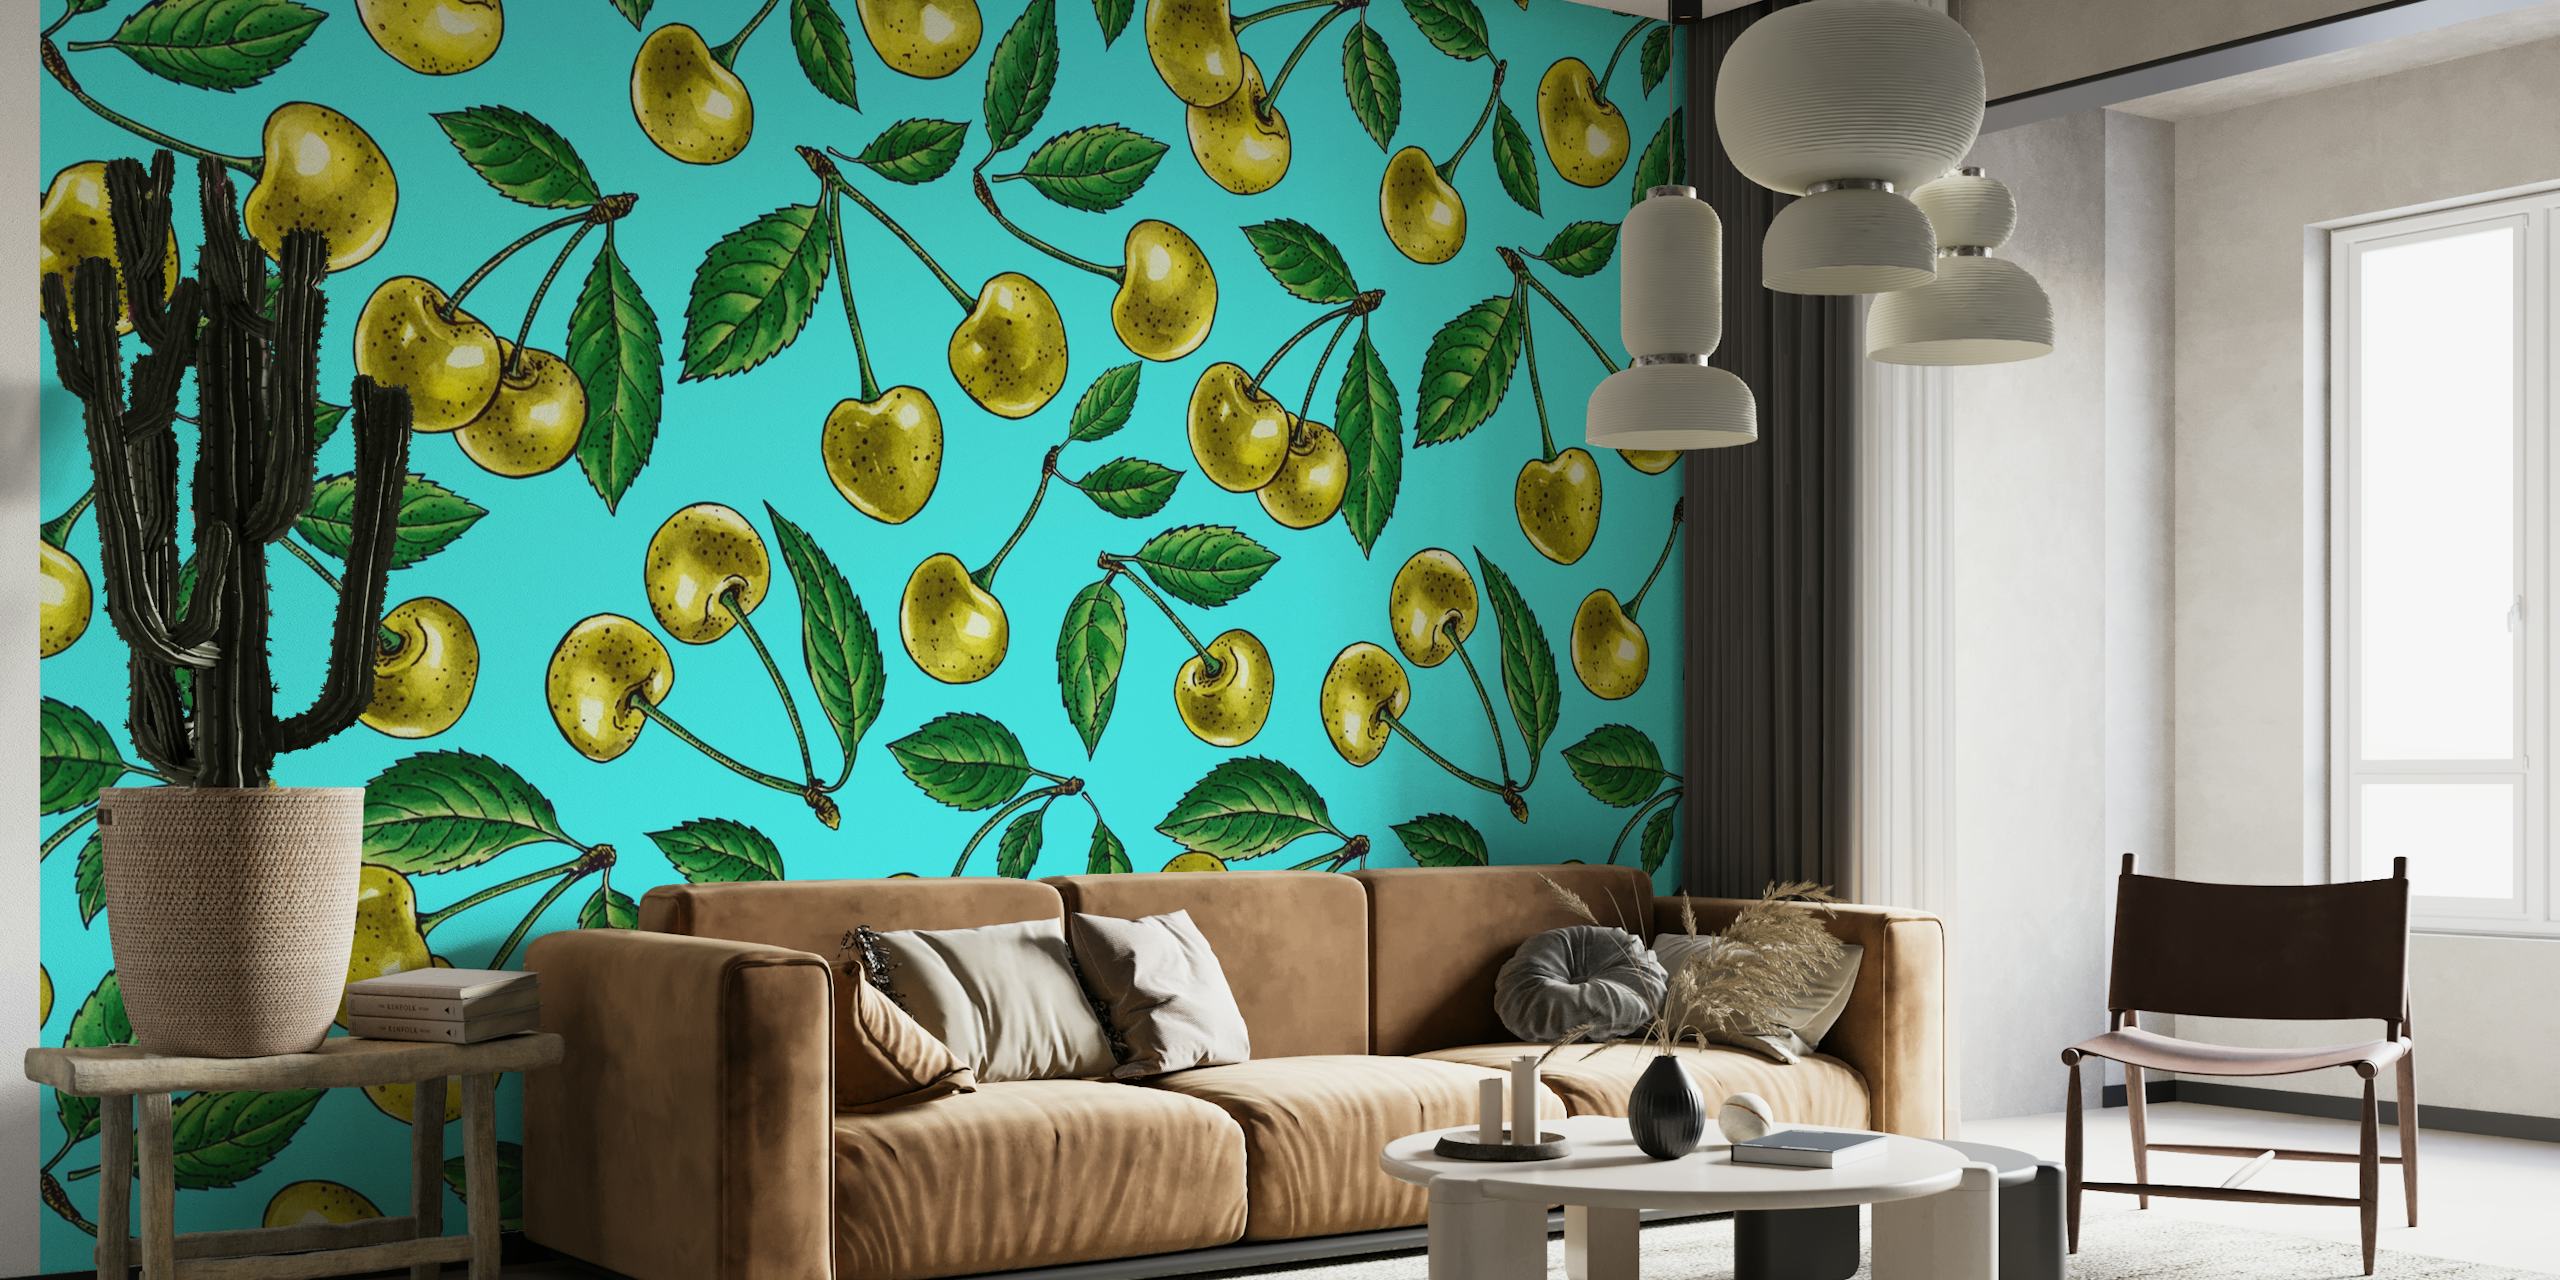 Yellow cherries pattern on turquoise background wall mural